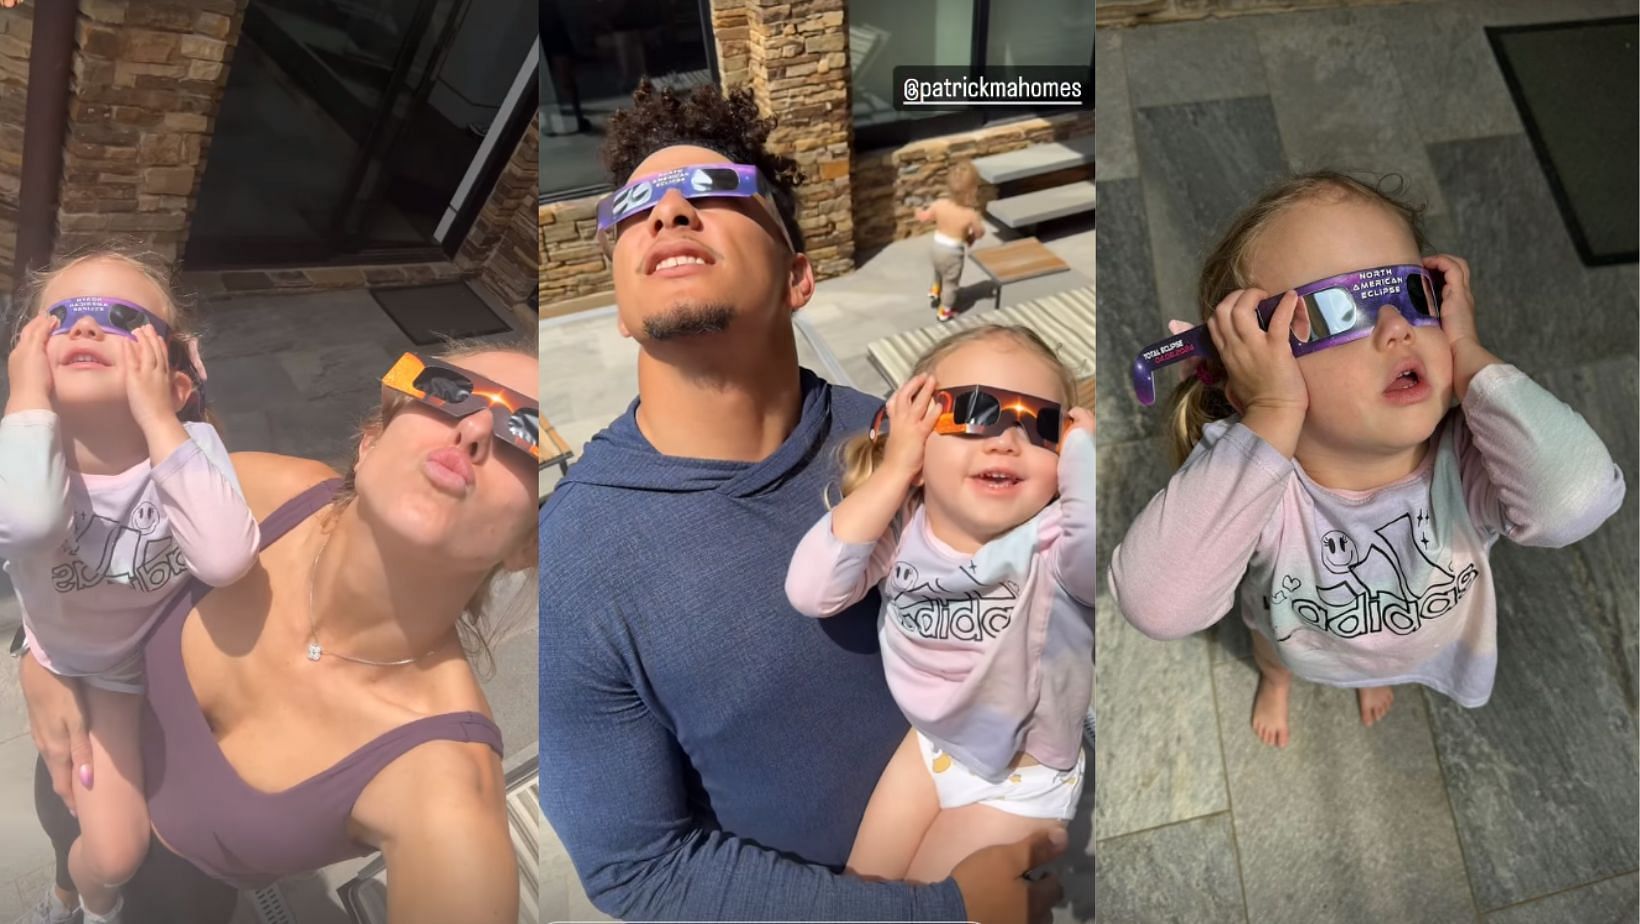 Patrick and Brittany Mahomes watching a solar eclipse last Monday with Sterling Skye